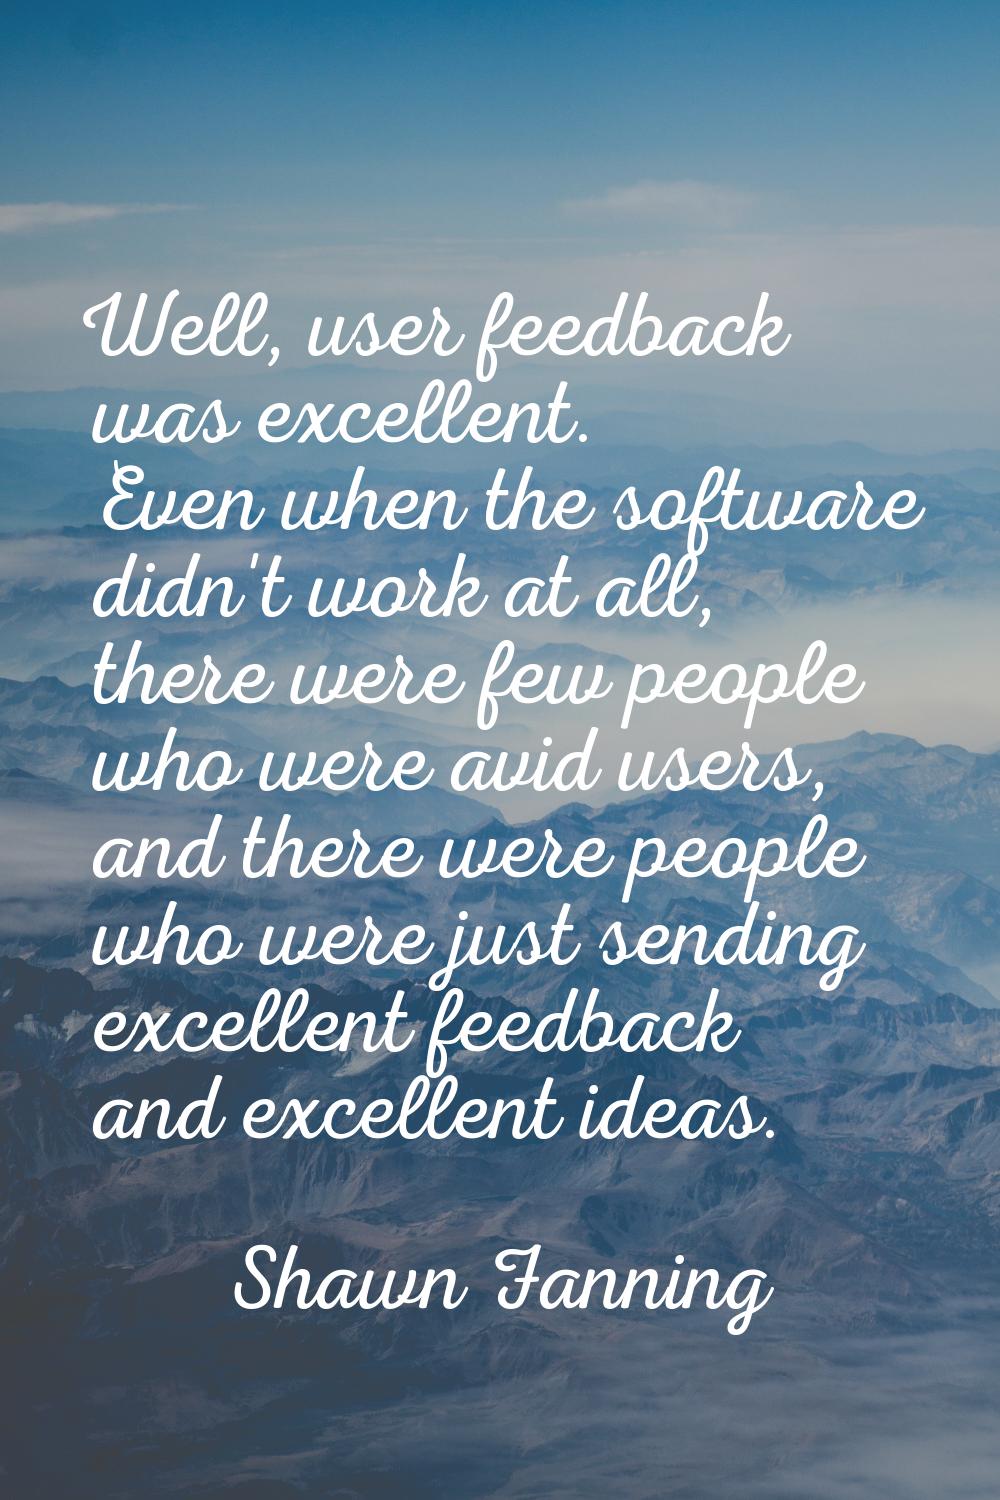 Well, user feedback was excellent. Even when the software didn't work at all, there were few people